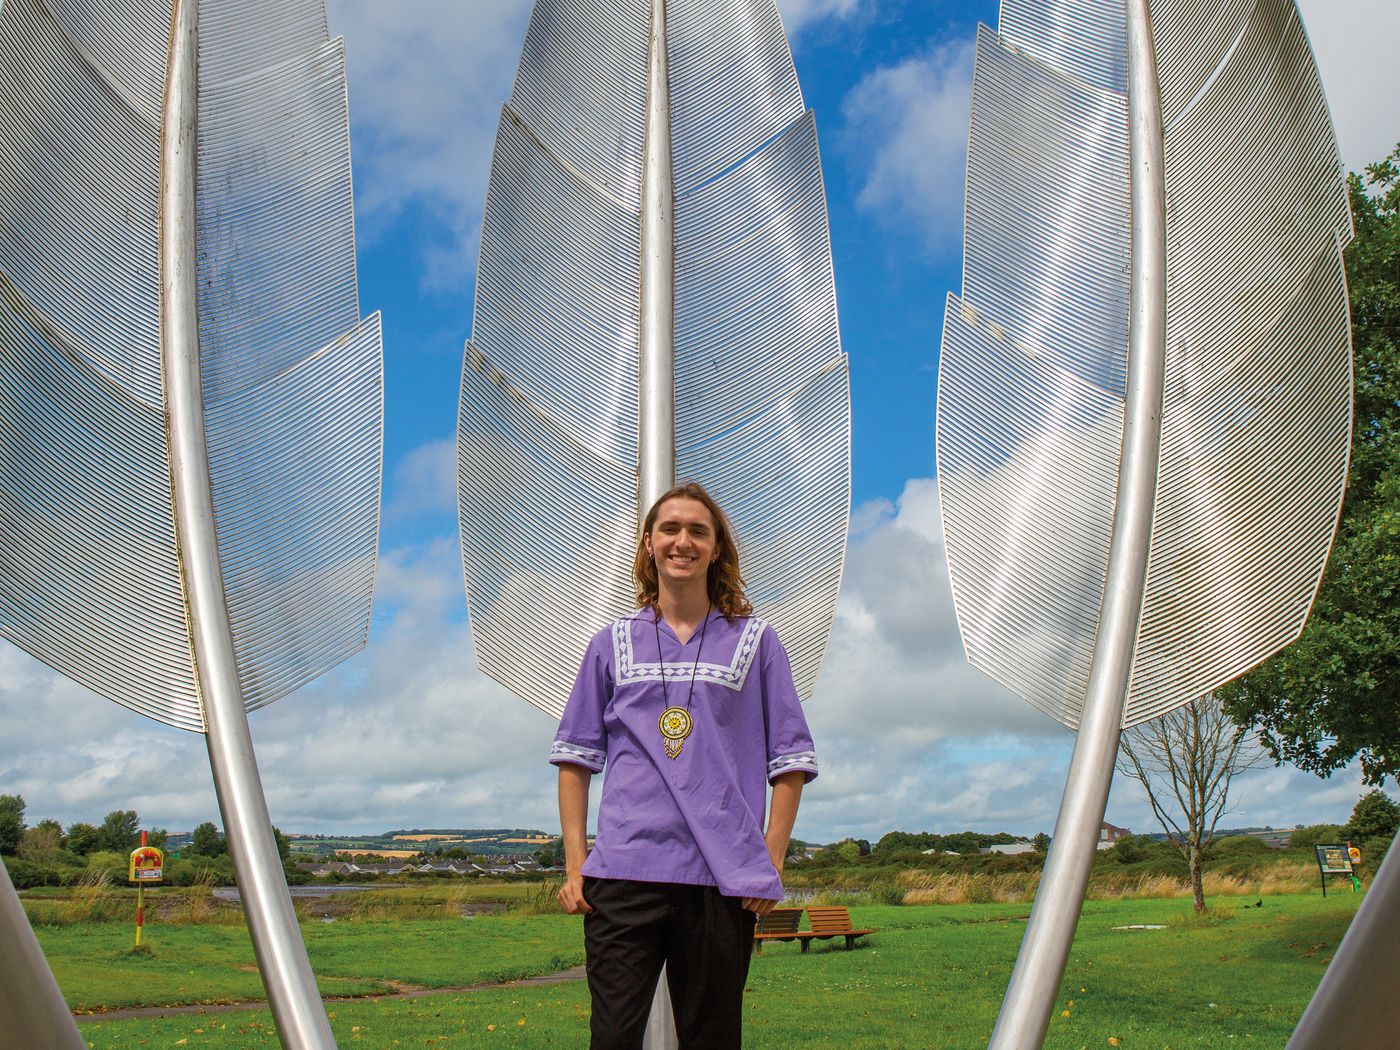 a man in purple shirt stands in front of a steel monument